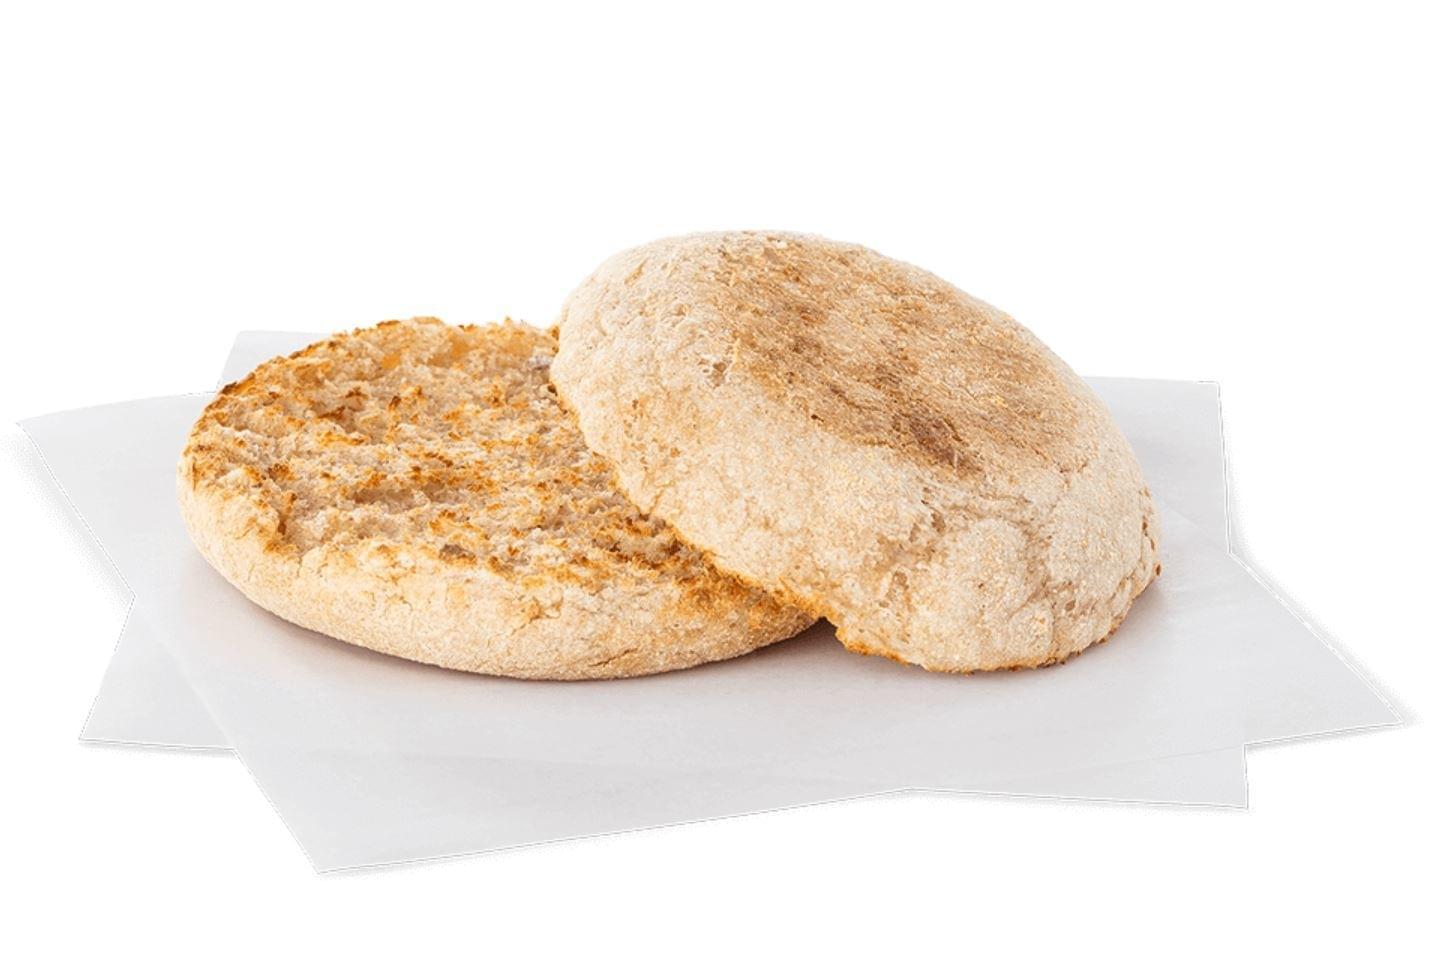 Chick-fil-A English Muffin Nutrition Facts